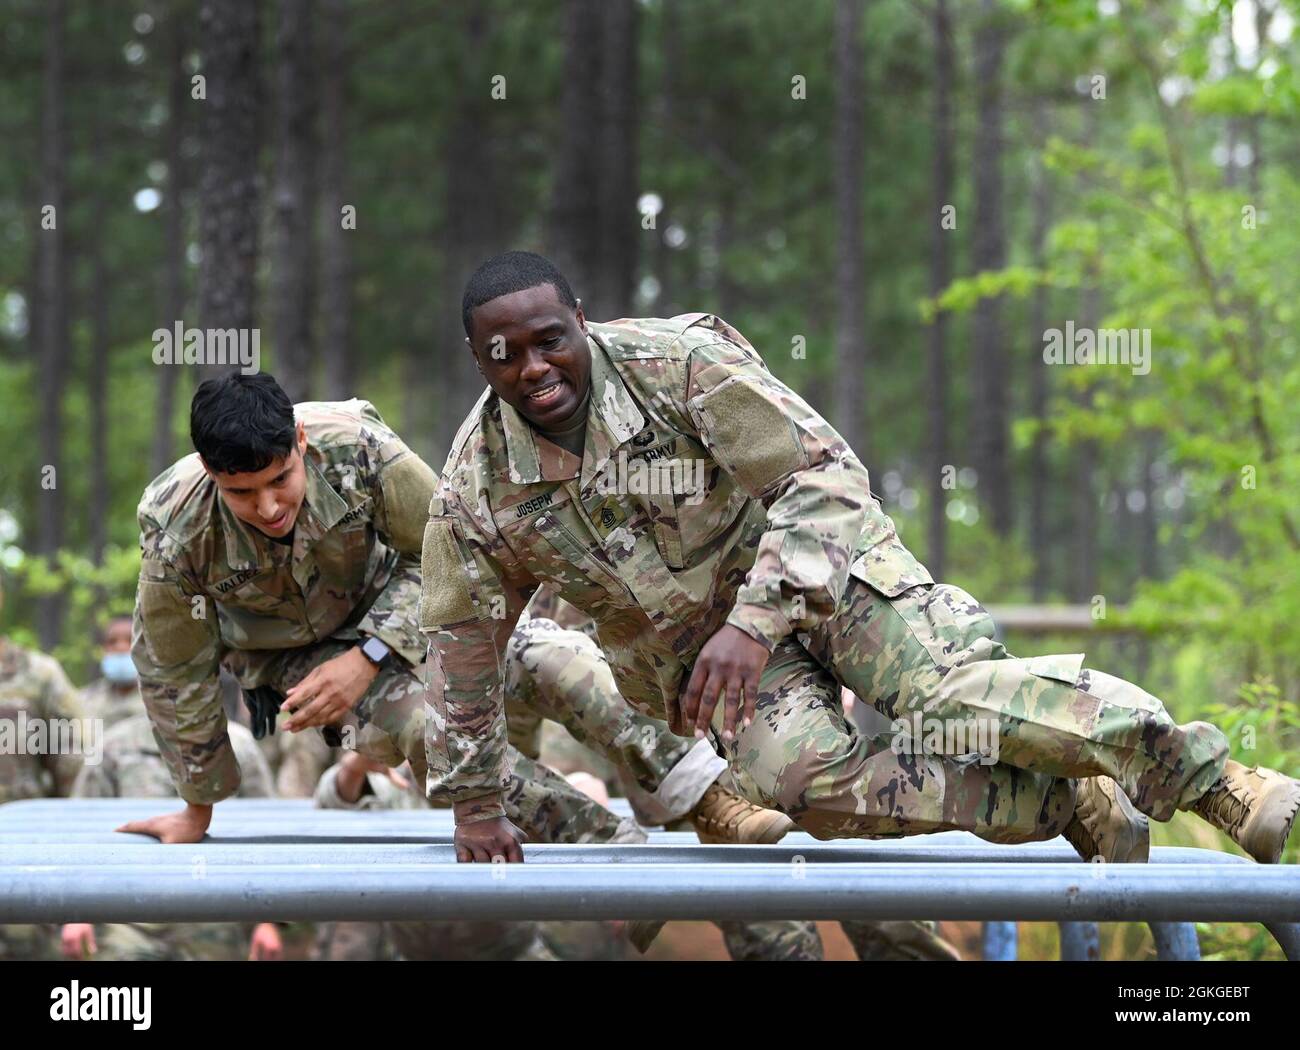 Soldiers from Support Battalion, 1st Special Warfare Training Group (Airborne) negotiate an obstacle during the battalion's Commander's Cup competition at Fort Bragg, North Carolina April 15, 2021. The Soldiers from each company competed in a ruck march, obstacle course, land navigation, Jeopardy-themed trivia contest and stress shoot with pistols and rifles. Stock Photo